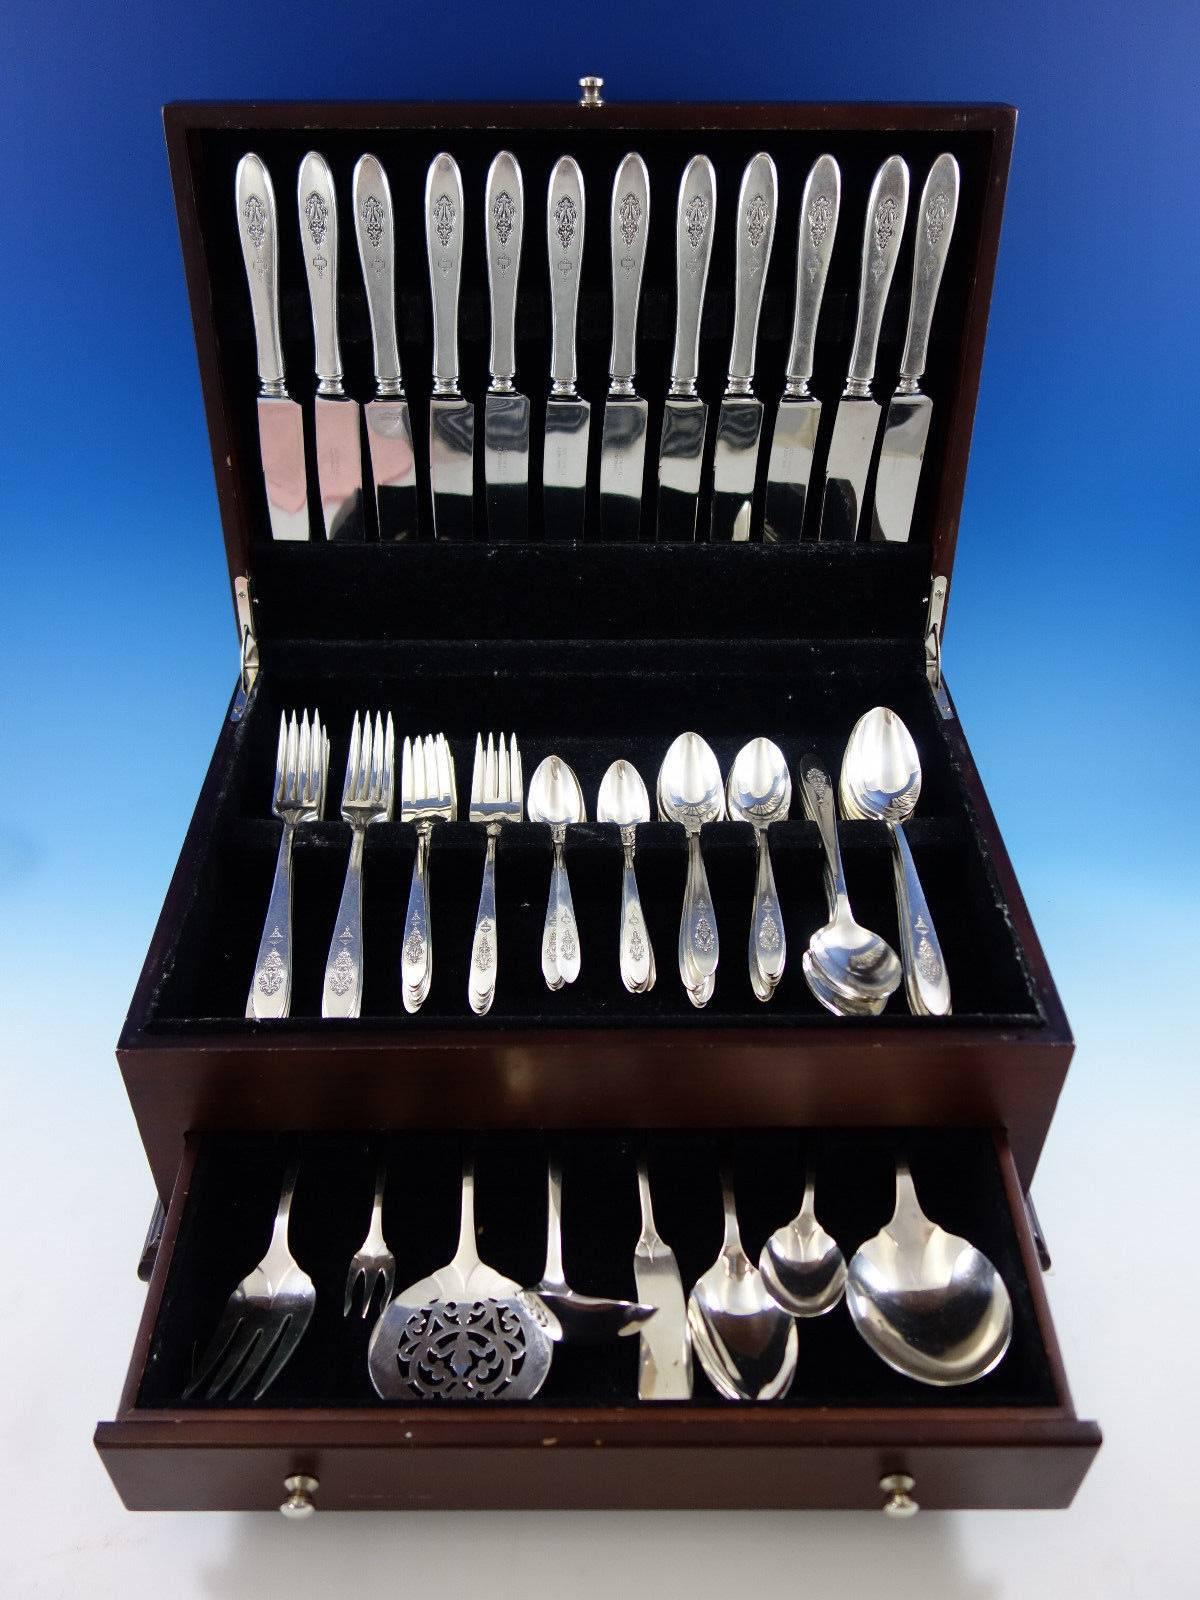 12 dinner knives, 8 1/2".
12 dinner forks, 7 1/4".
12 salad forks, 6 1/2".
12 teaspoons, 6".
12 place soup spoons, 7 1/4".
12 coffee spoons, 5".
One gravy ladle, 6 7/8".
One serving spoon, 8